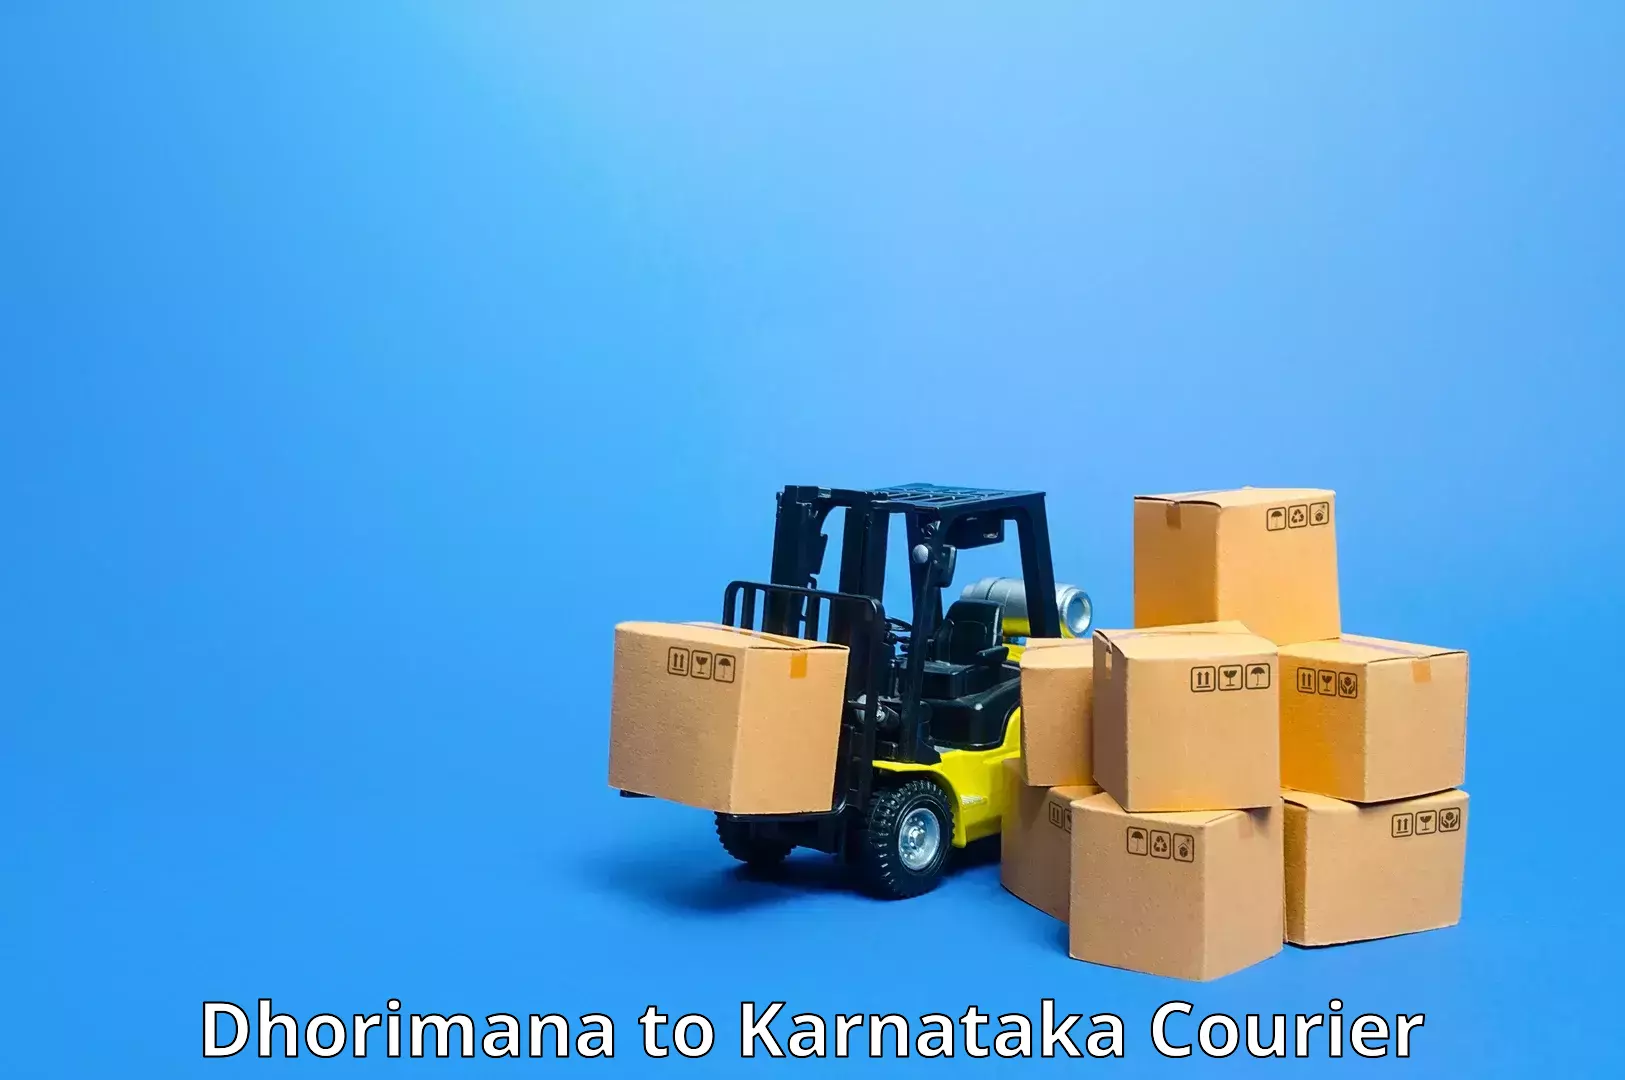 High-capacity parcel service Dhorimana to Manipal Academy of Higher Education